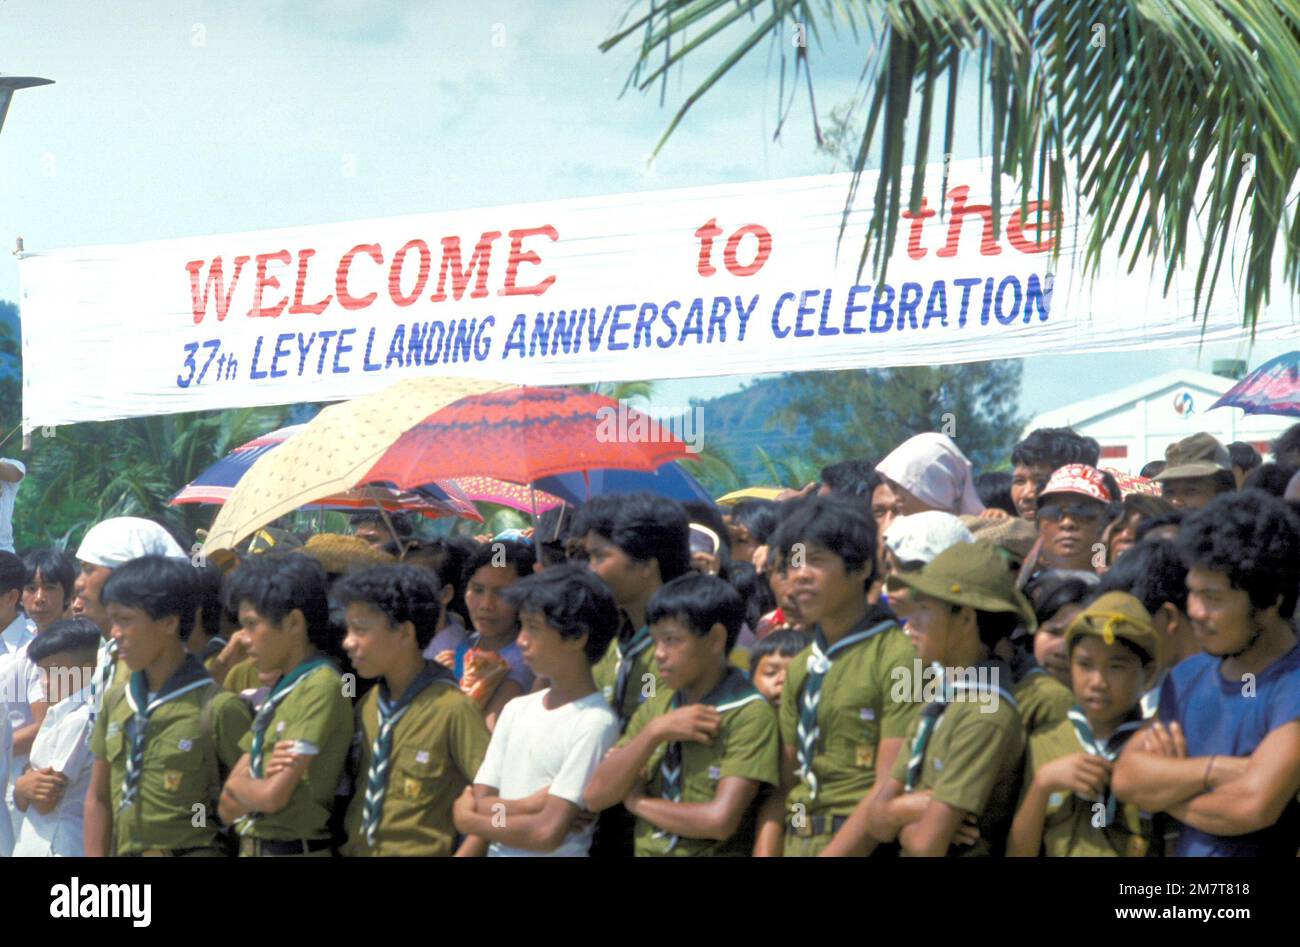 Local people view activities during the 37th Leyte Landing Anniversary CElebration commemorating GEN Douglas MacArthur's return here on Oct. 20, 1944. MacArthur's return fulfilled his earlier and oft-quoted promise of 'I shall return'. Base: Leyte Country: Philippines (PHL) Stock Photo